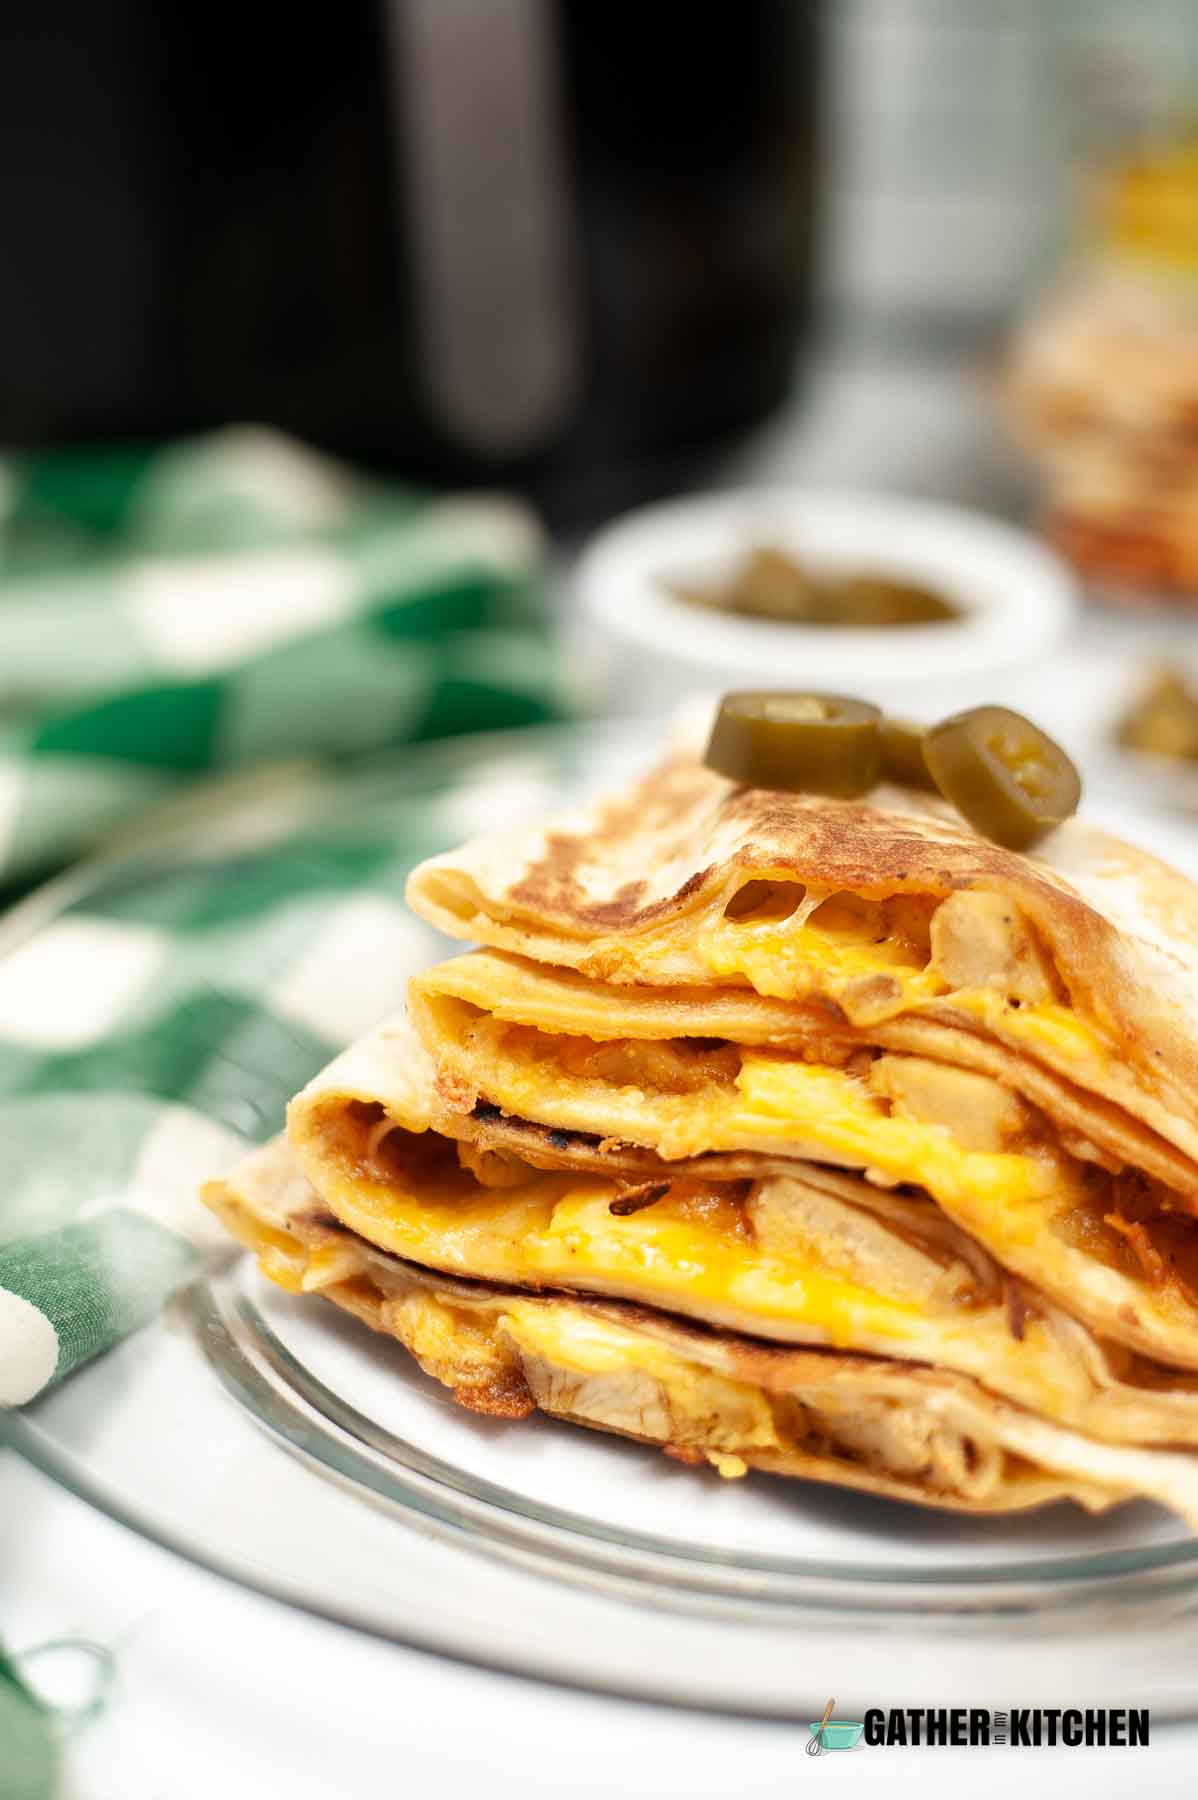 Stack of copycat Taco Bell quesadillas on a plate.